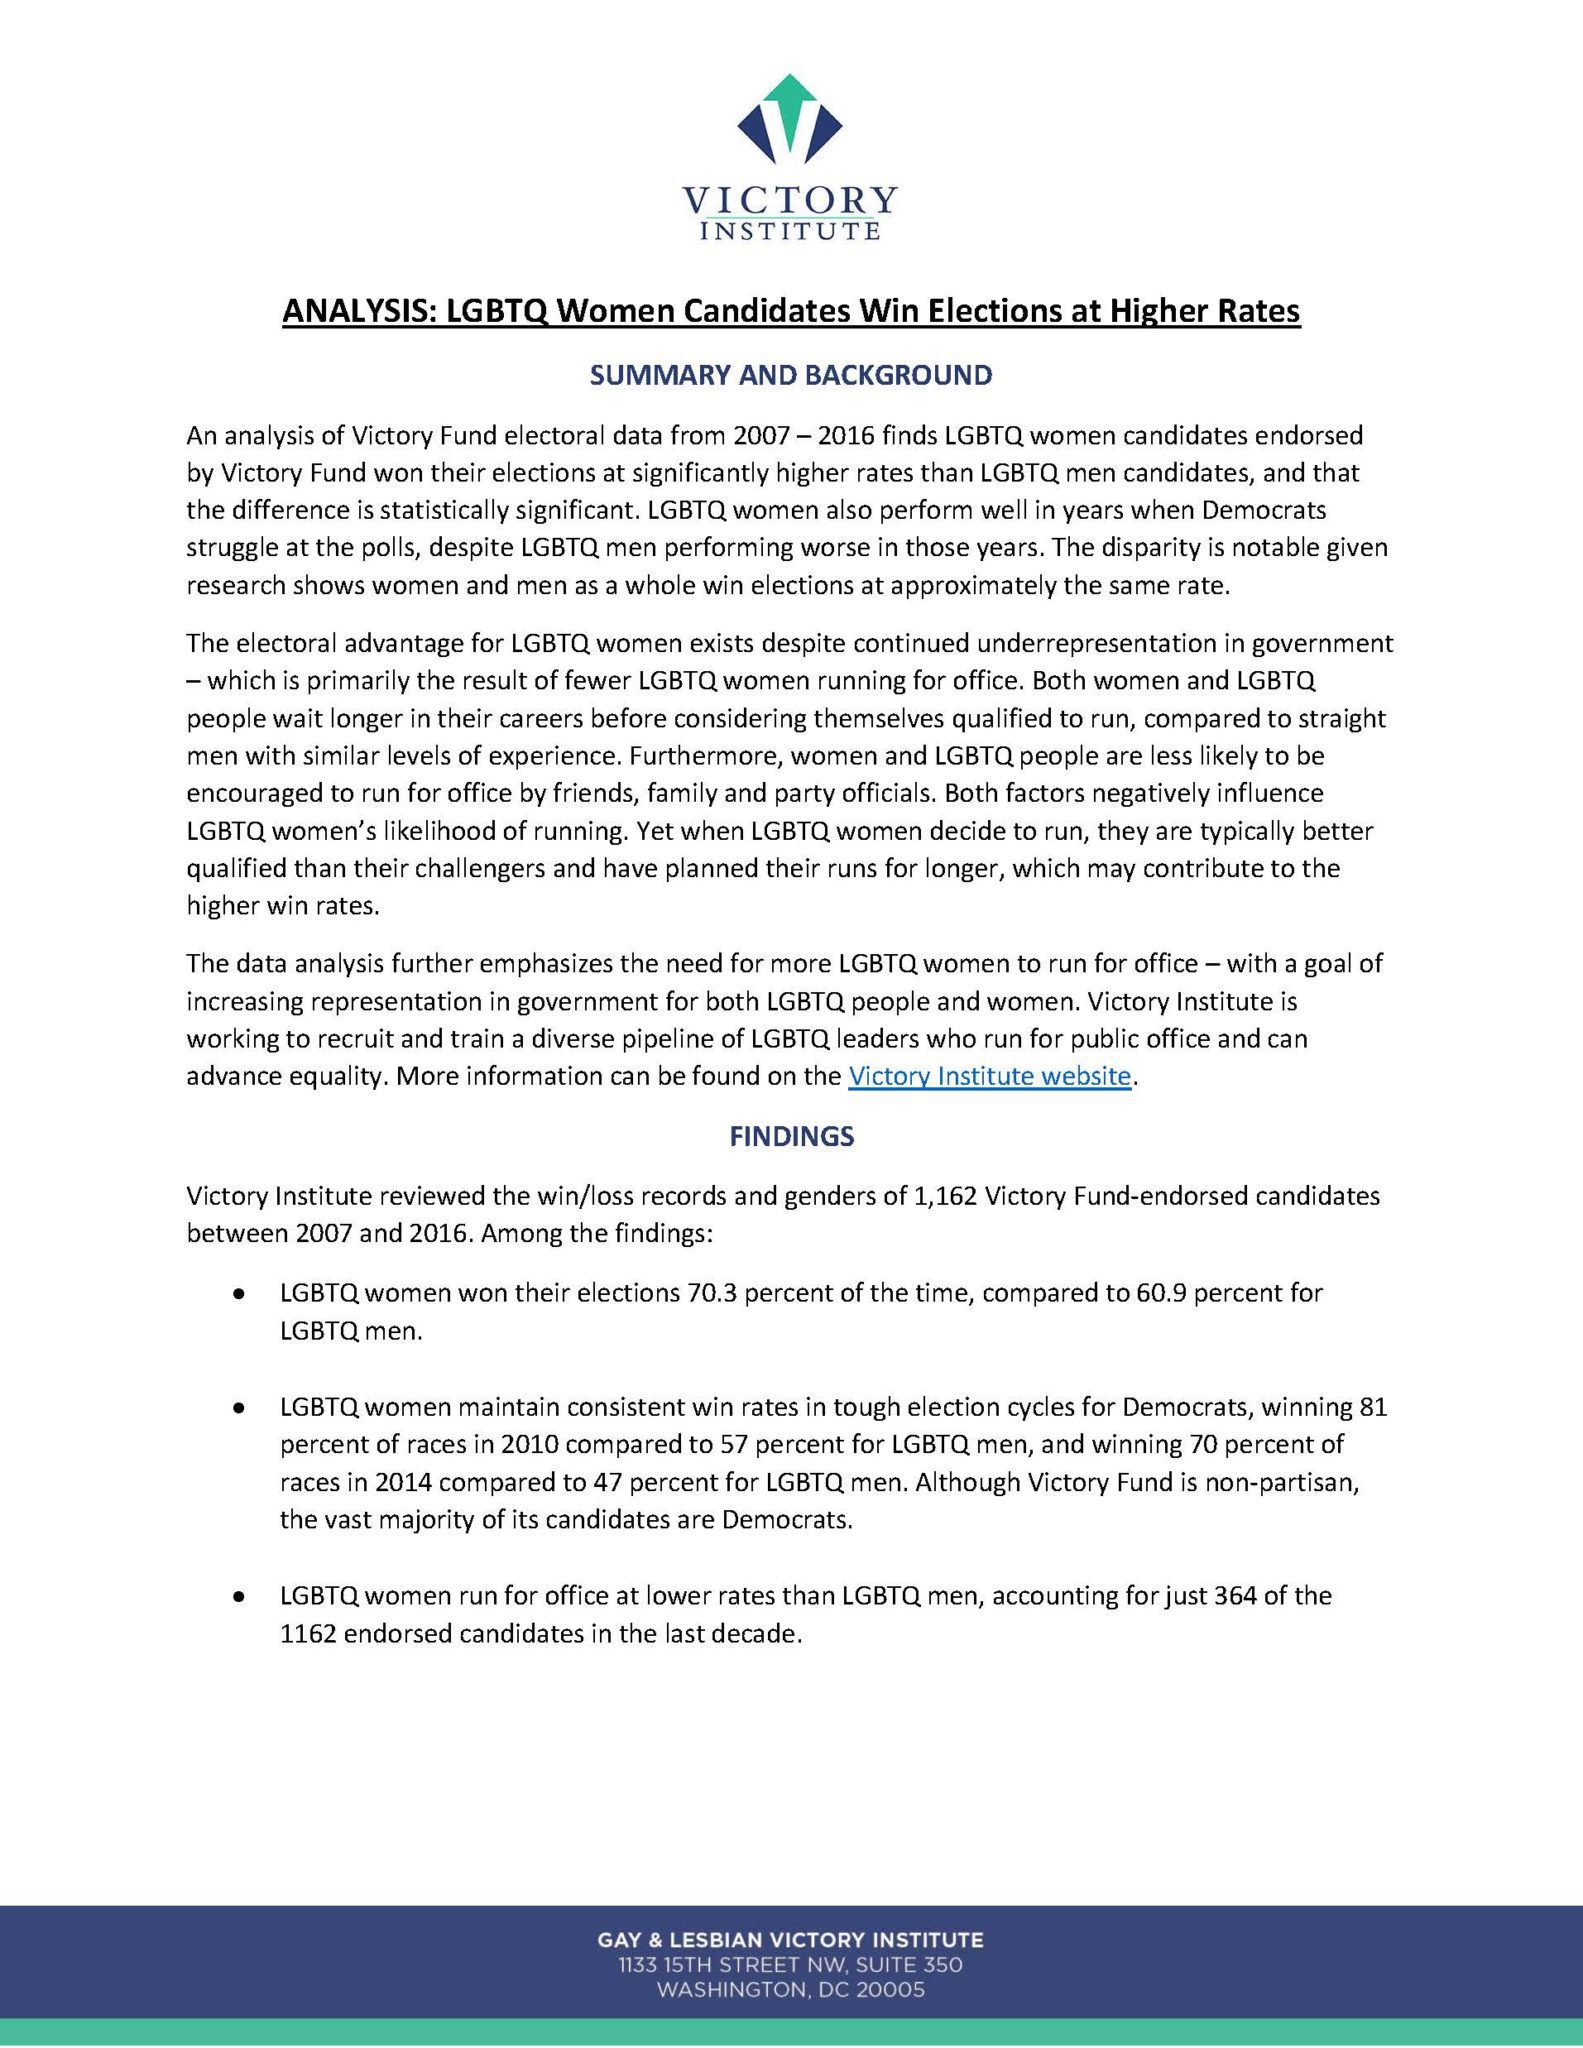 LGBTQ Women Candidates Win at higher Rates